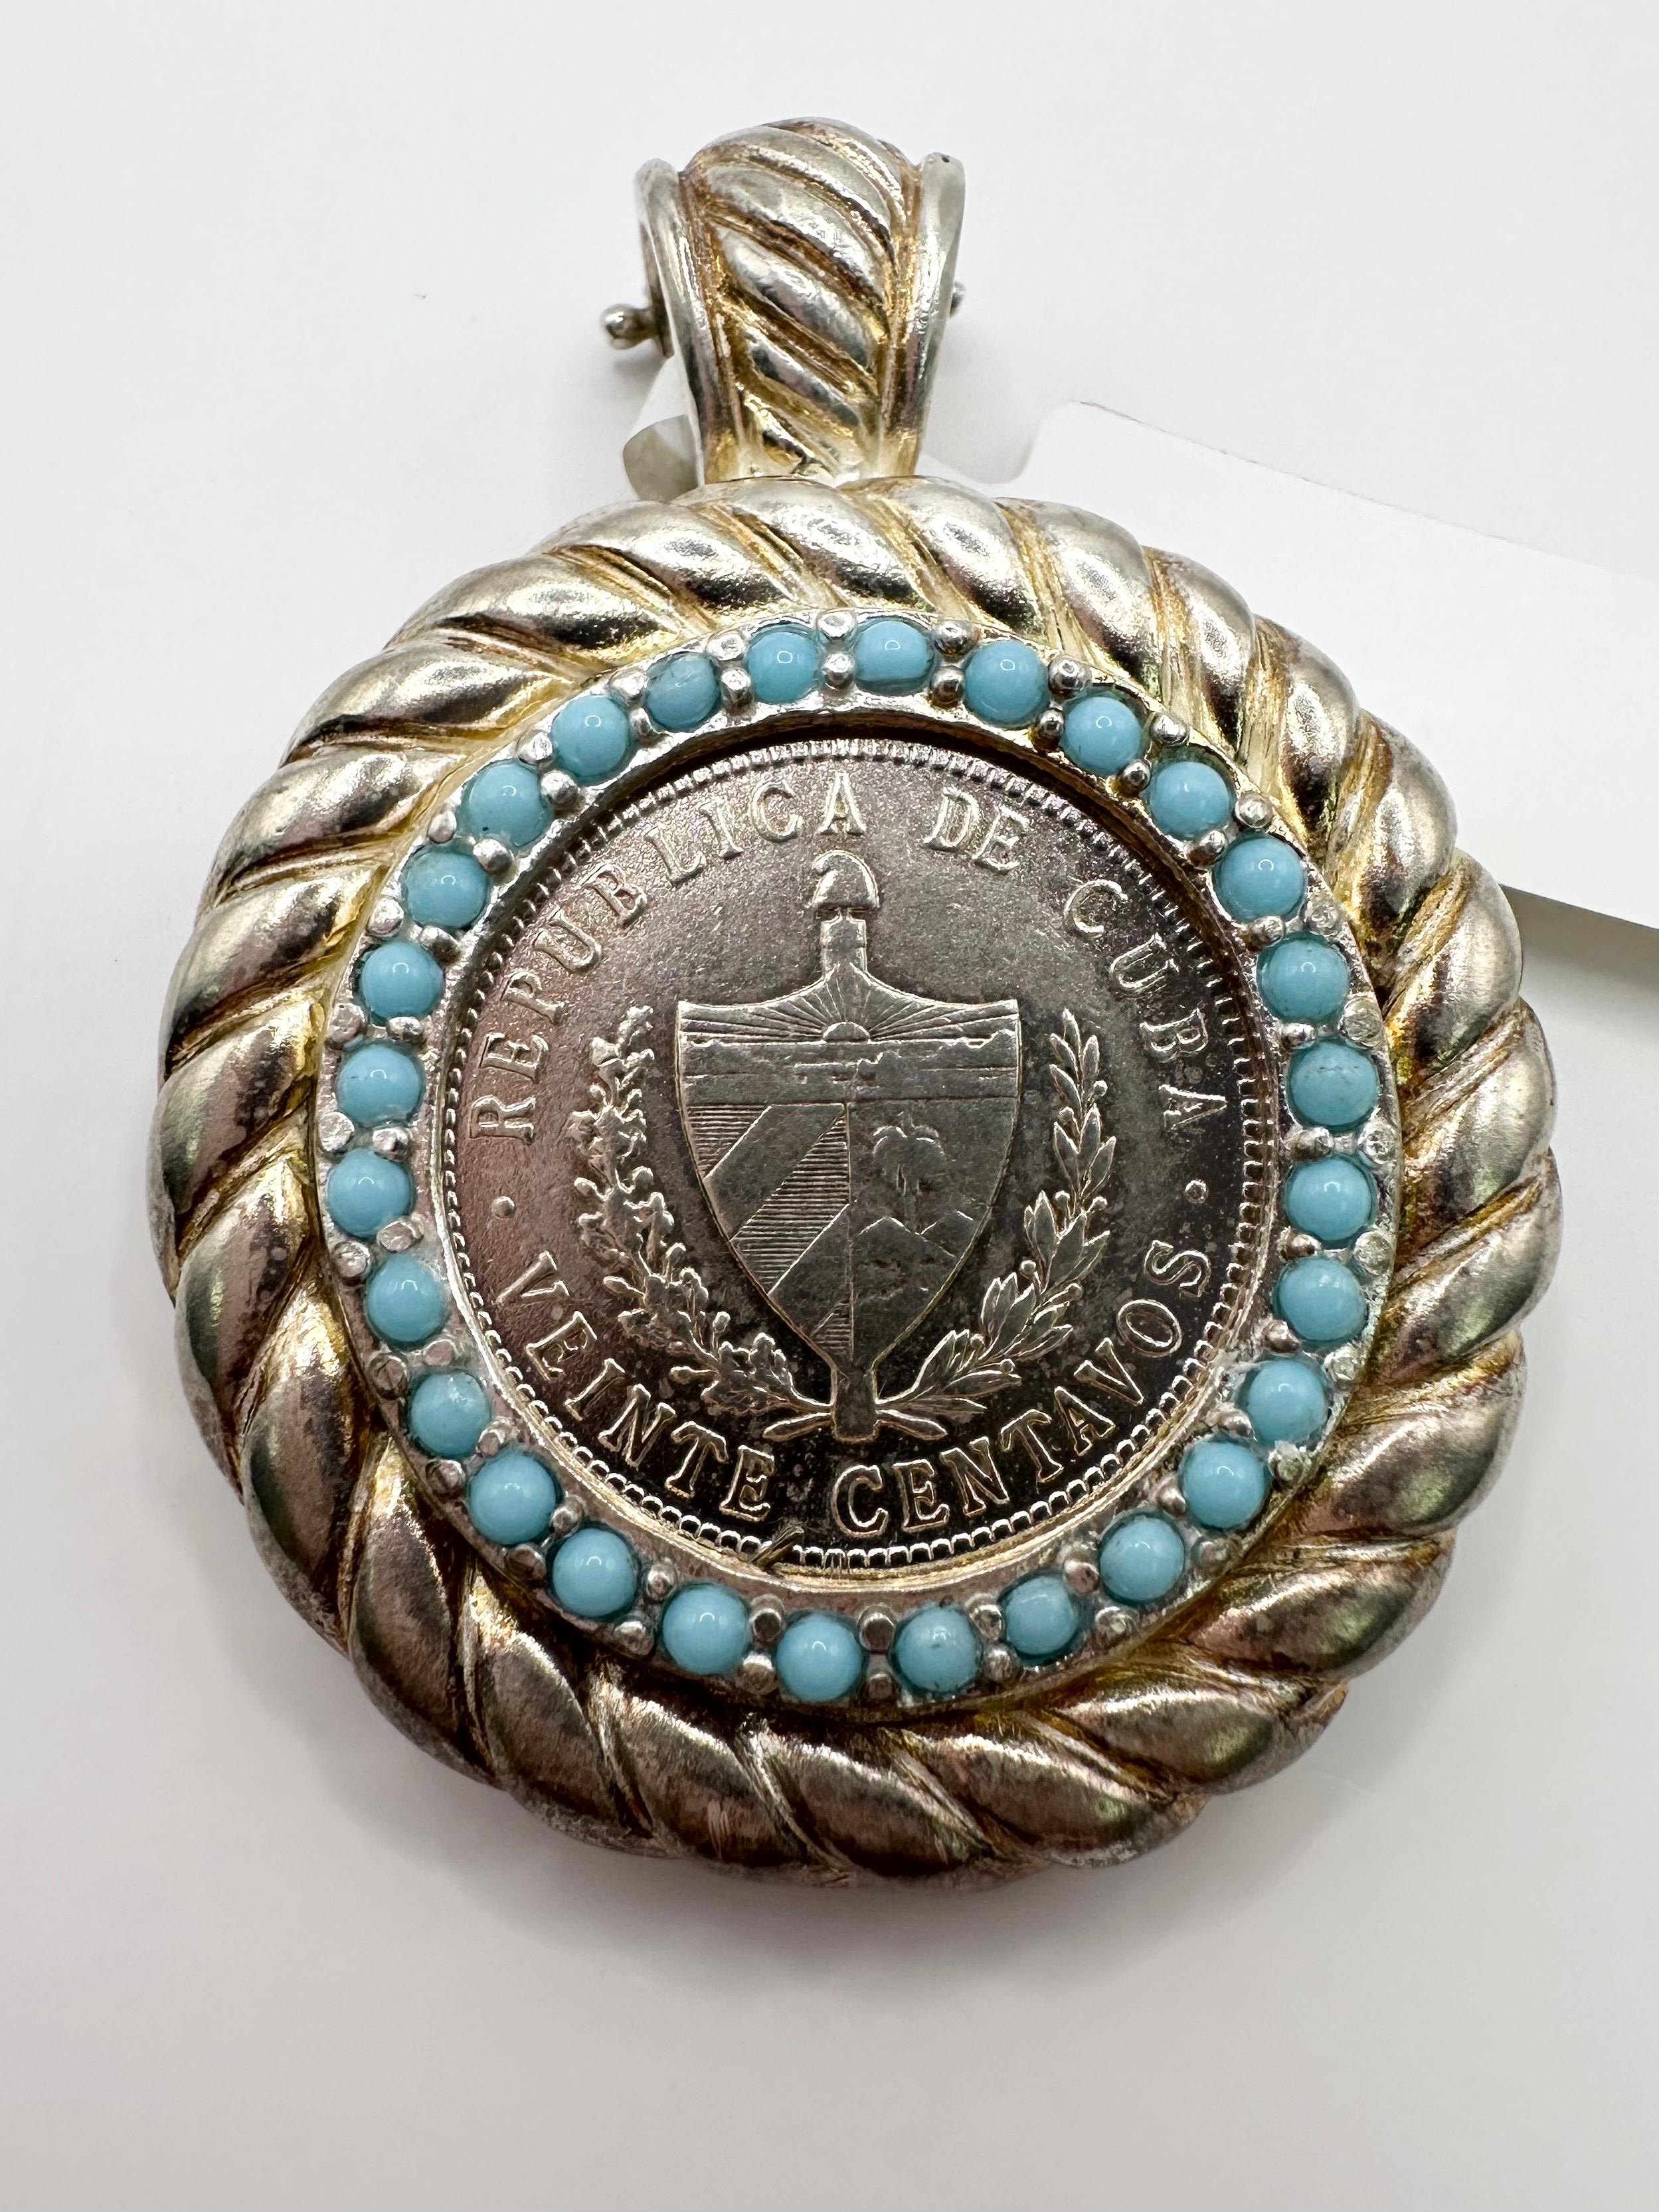 Coin pendant from Cuba, beautifully made with turquoise all around, pendant is in silver! Stunning workmanship !


Certificate of authenticity comes with purchase!

ABOUT US
We are a family-owned business. Our studio in located in the heart of Boca